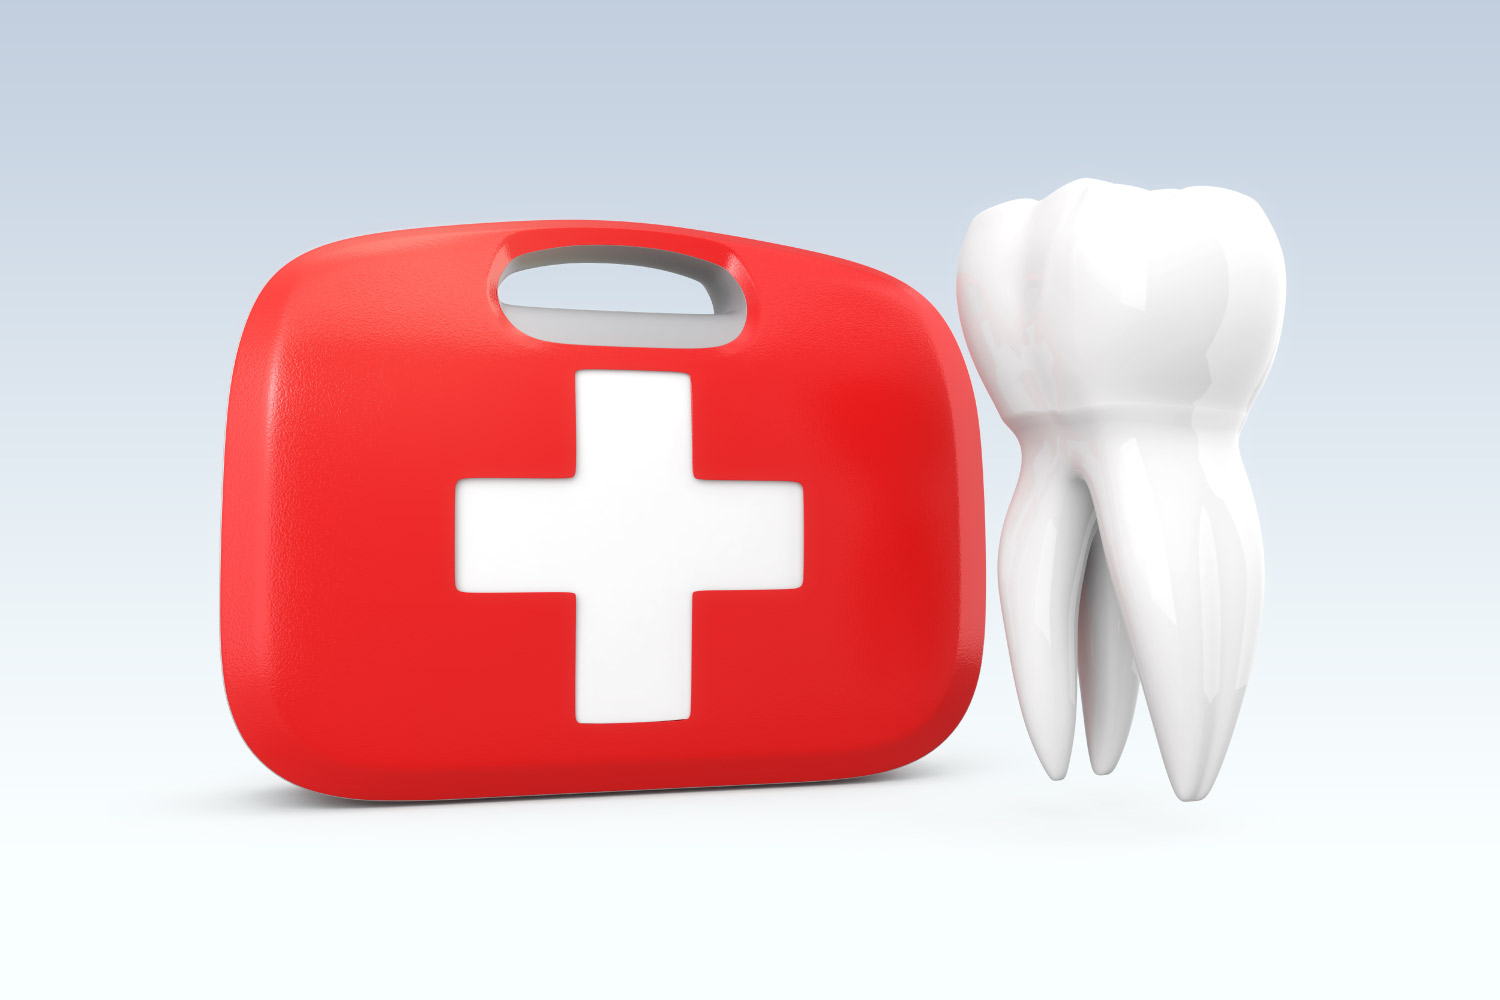 Tooth next to a red and white first aid kit to treat a dental emergency in Dallas, TX